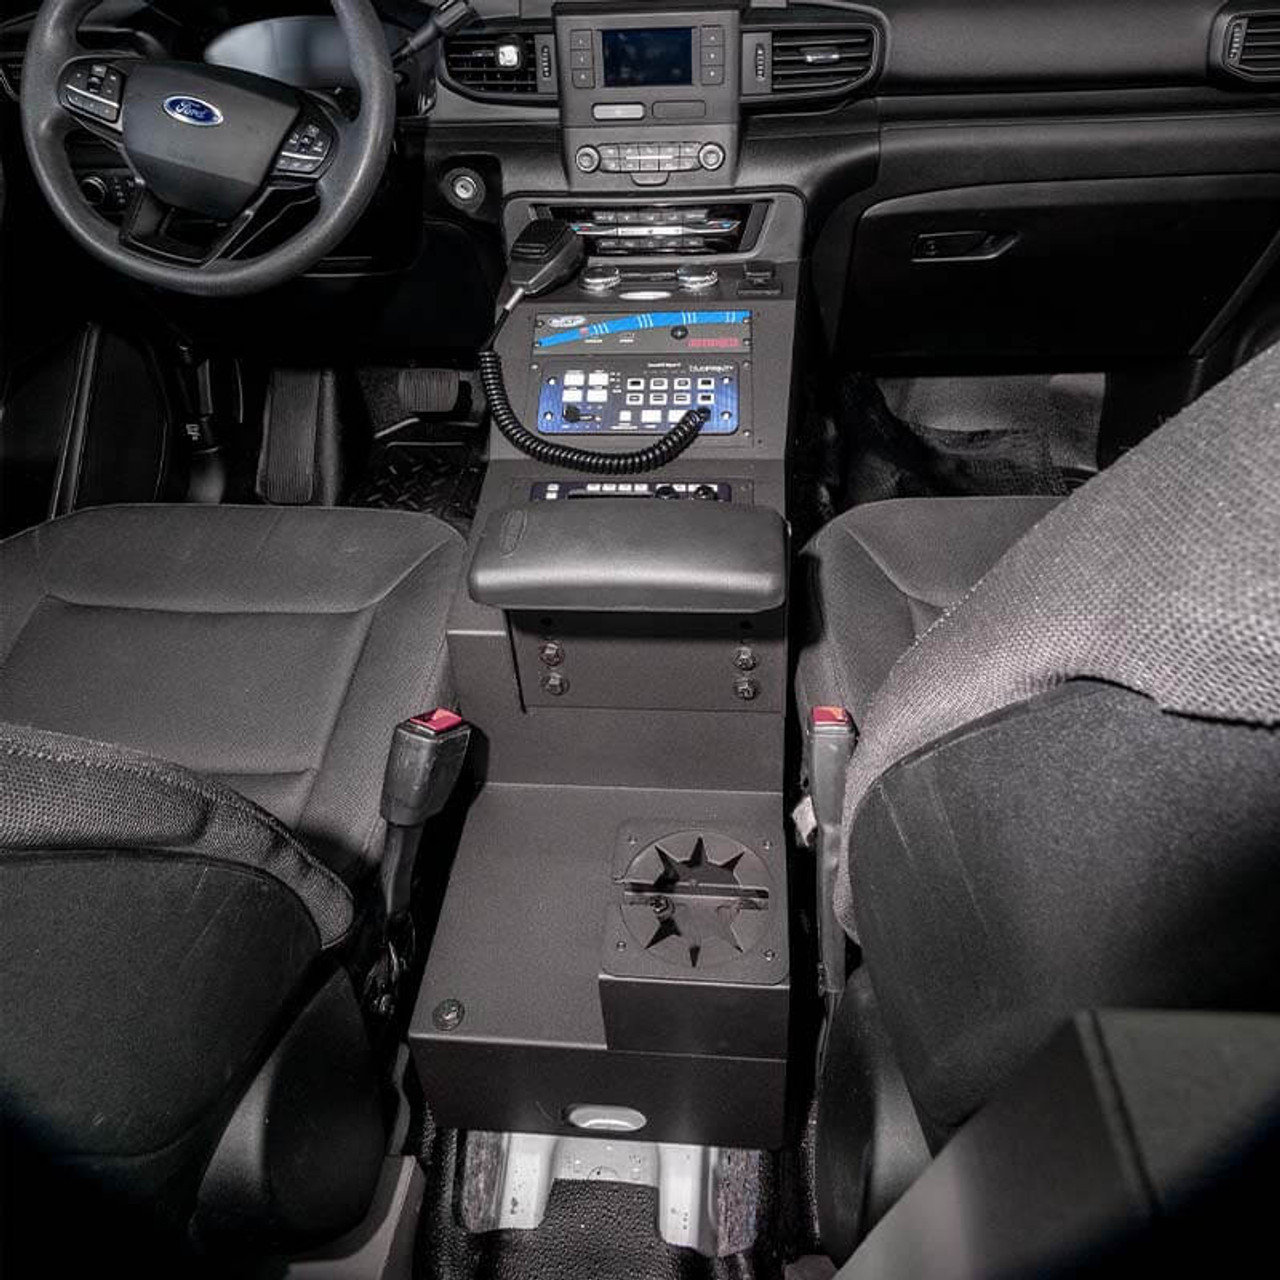 Jotto-Desk 425-0029, Rear Mounted, Tall Armrest Console Accessory, For 2021+ Ford Police Interceptor Utility